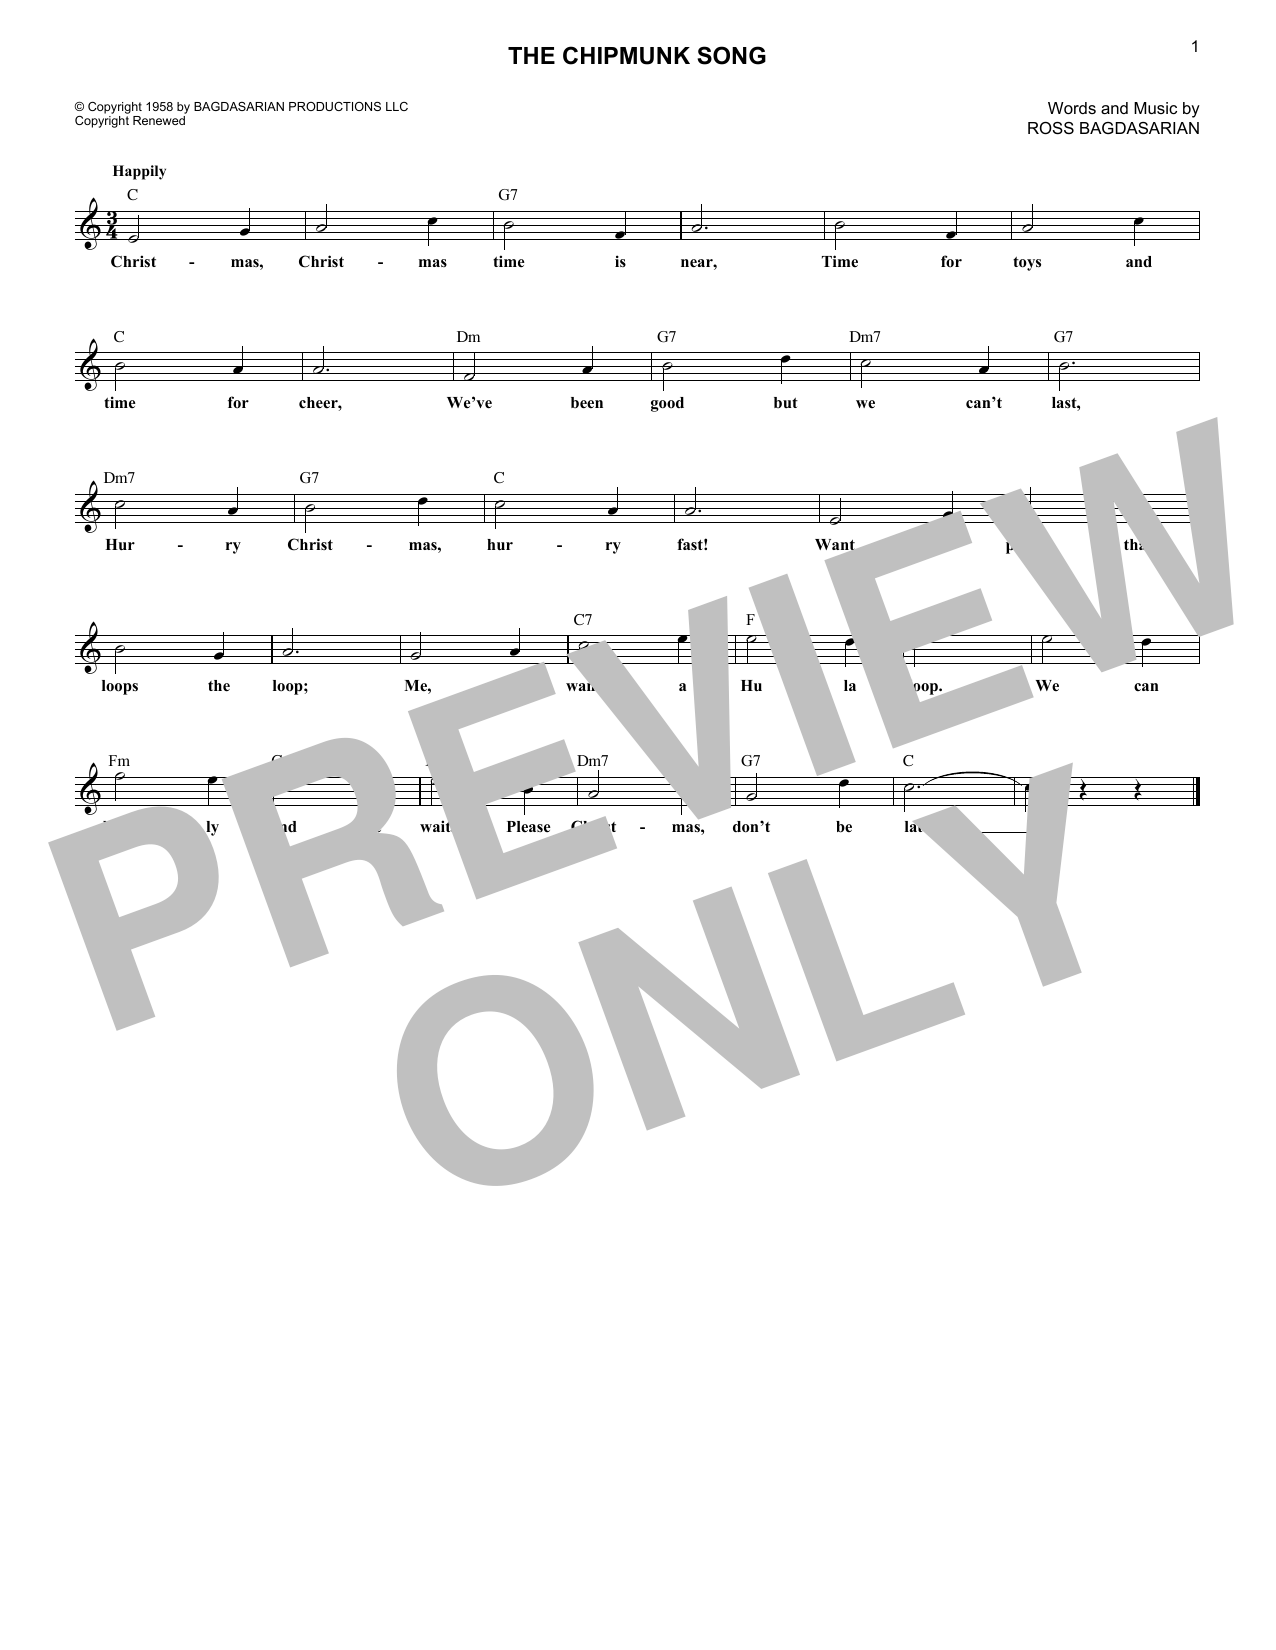 Download Alvin and the Chipmunks The Chipmunk Song Sheet Music